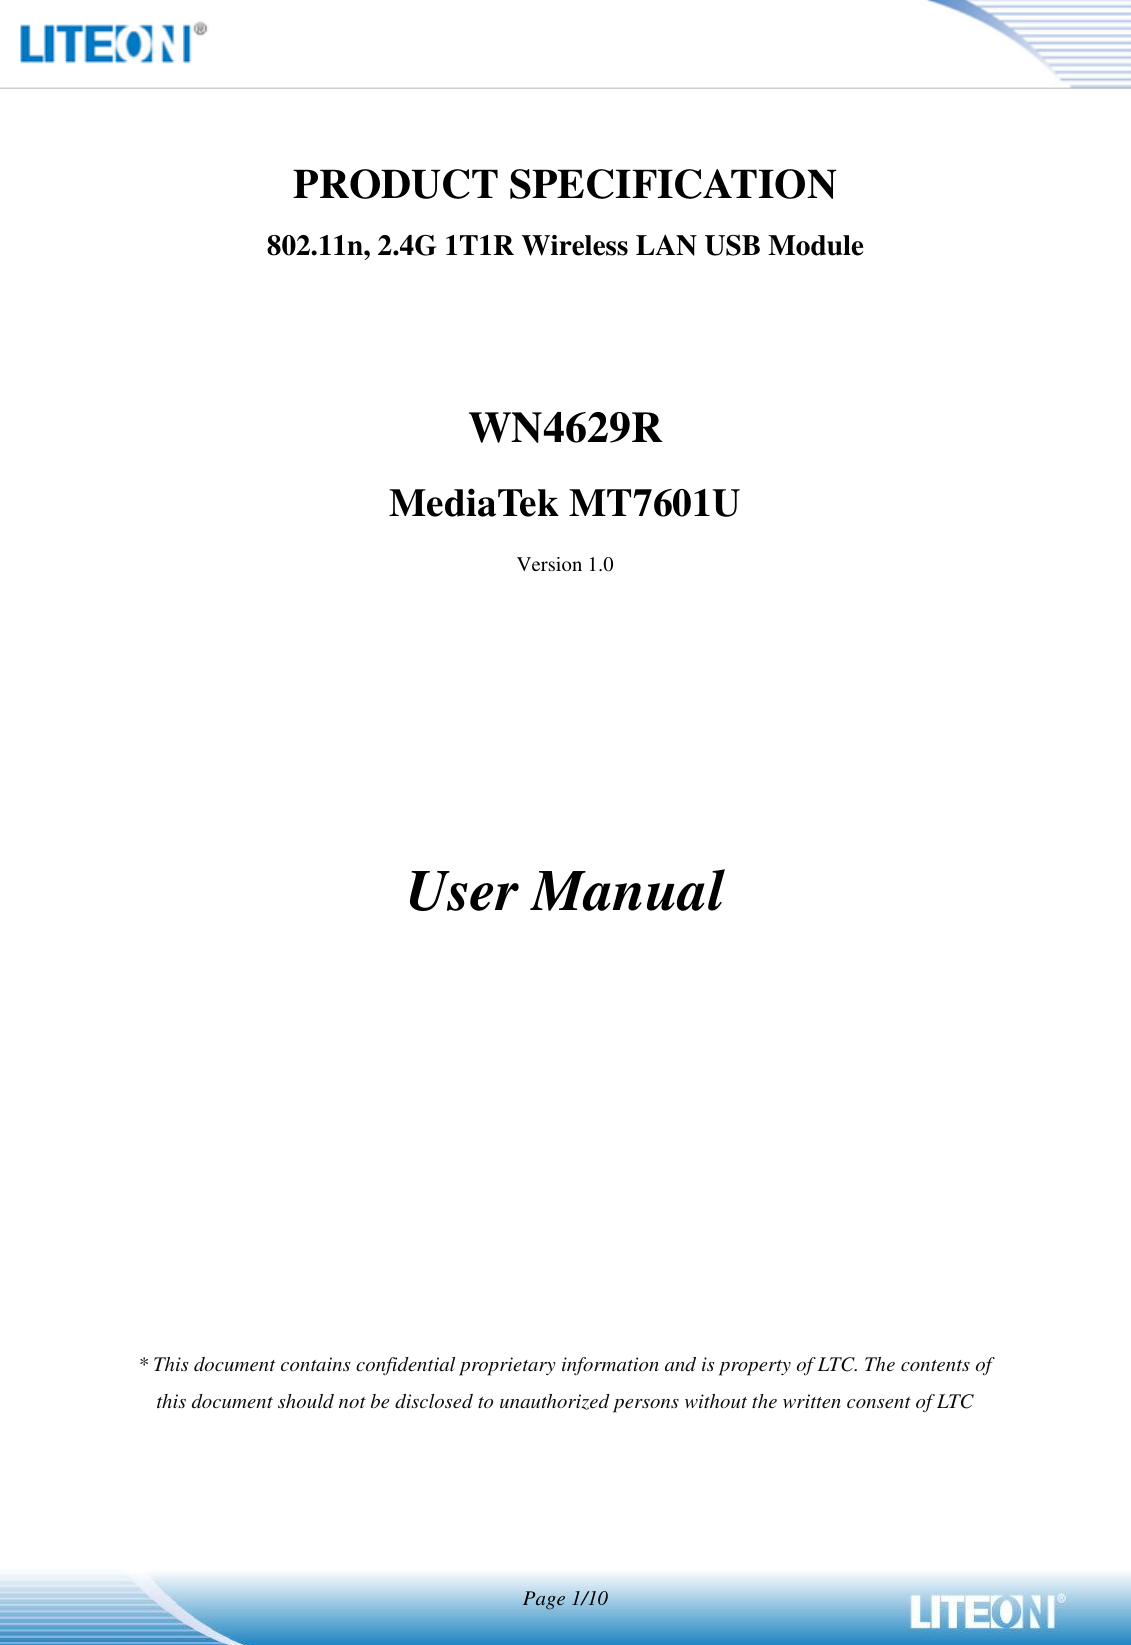   Page 1/10   PRODUCT SPECIFICATION 802.11n, 2.4G 1T1R Wireless LAN USB Module   WN4629R MediaTek MT7601U Version 1.0        User Manual            * This document contains confidential proprietary information and is property of LTC. The contents of this document should not be disclosed to unauthorized persons without the written consent of LTC  